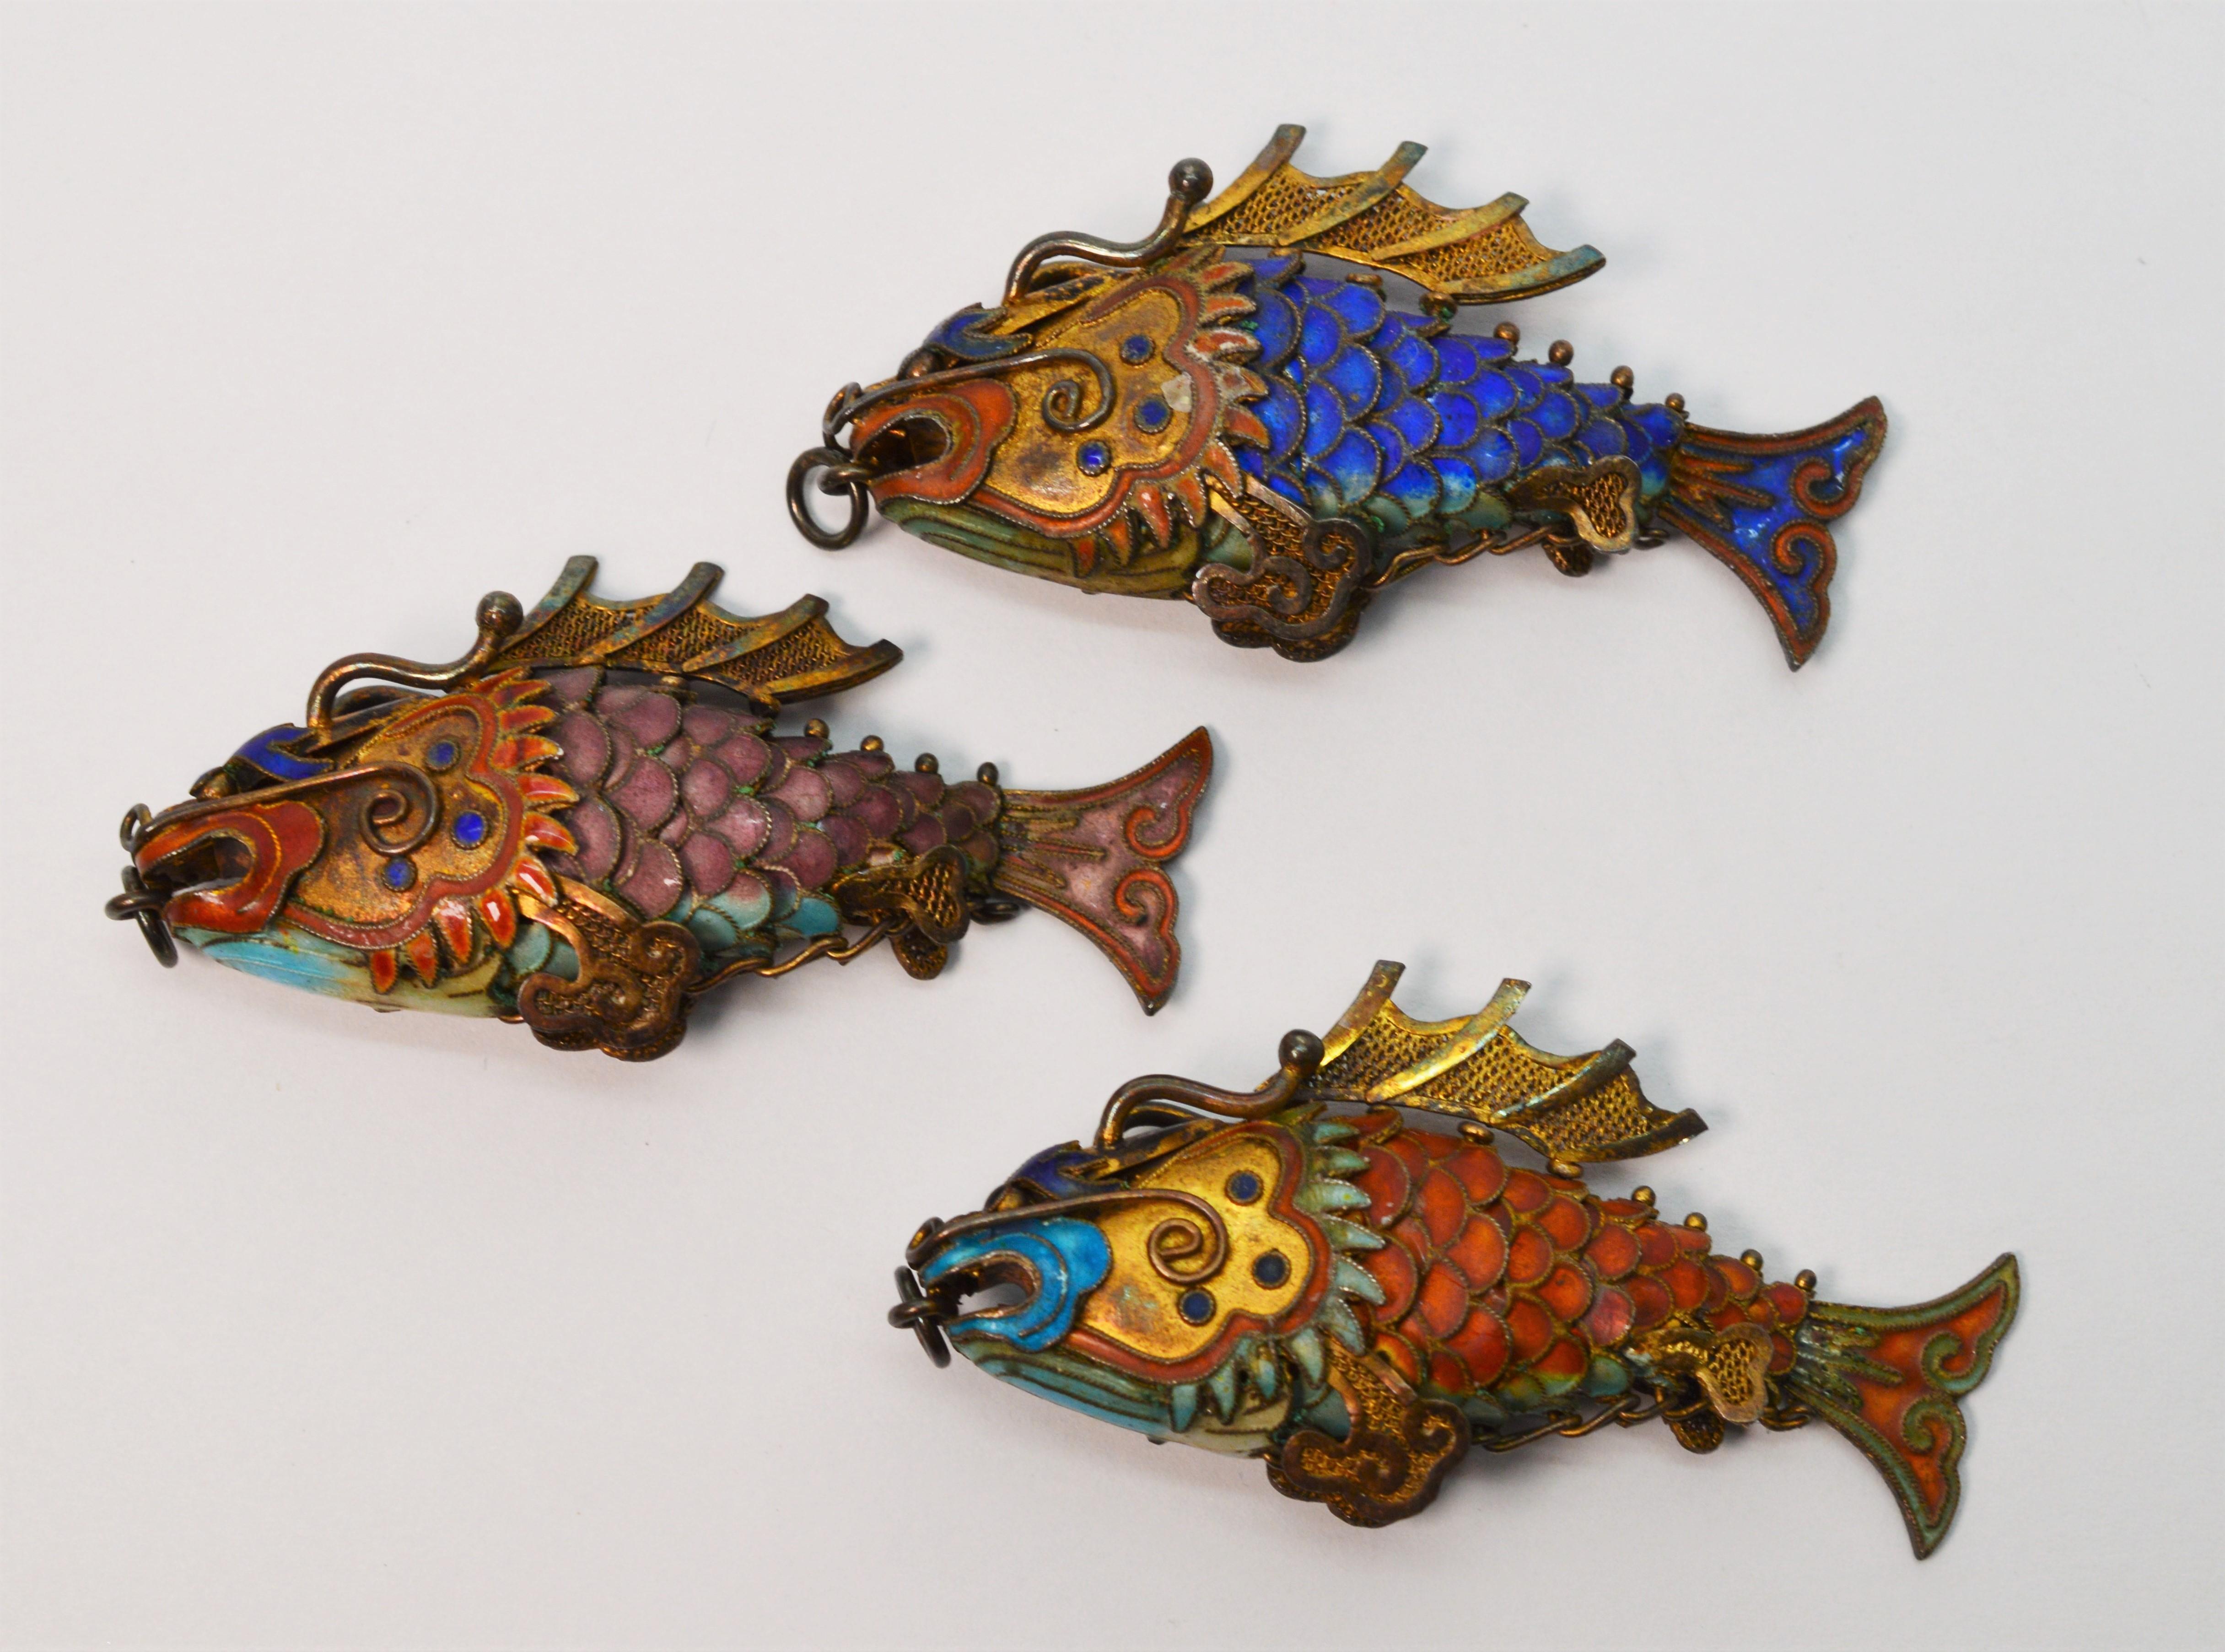 An artful and fun school of three imaginative Chinese Cloisonne Enamel Koi Fish Pendant Charms. Made of gilt silver with hand painted enamel, each Koi is unique in color and design with articulated fish tails that move. Circa 1920 - 1930 as a